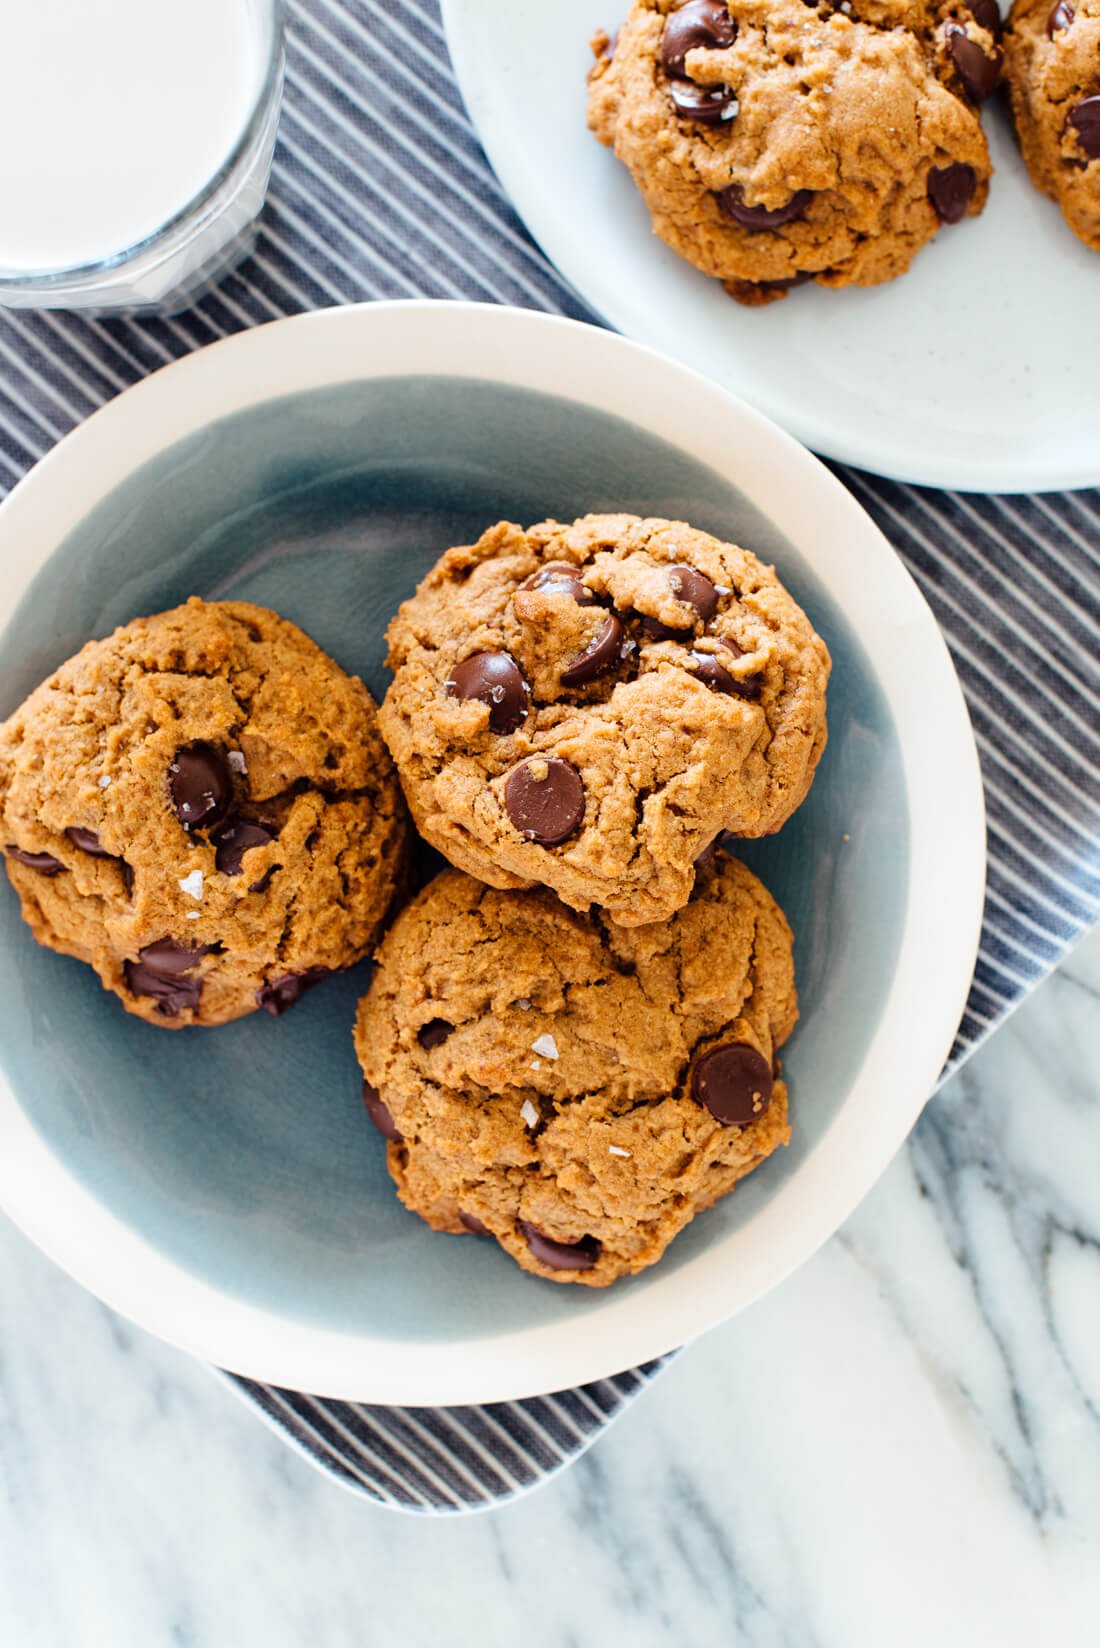 Amazing Chocolate Chip Cookies Recipe Vegan Cookie And Kate,Quinoa Protein Bowl